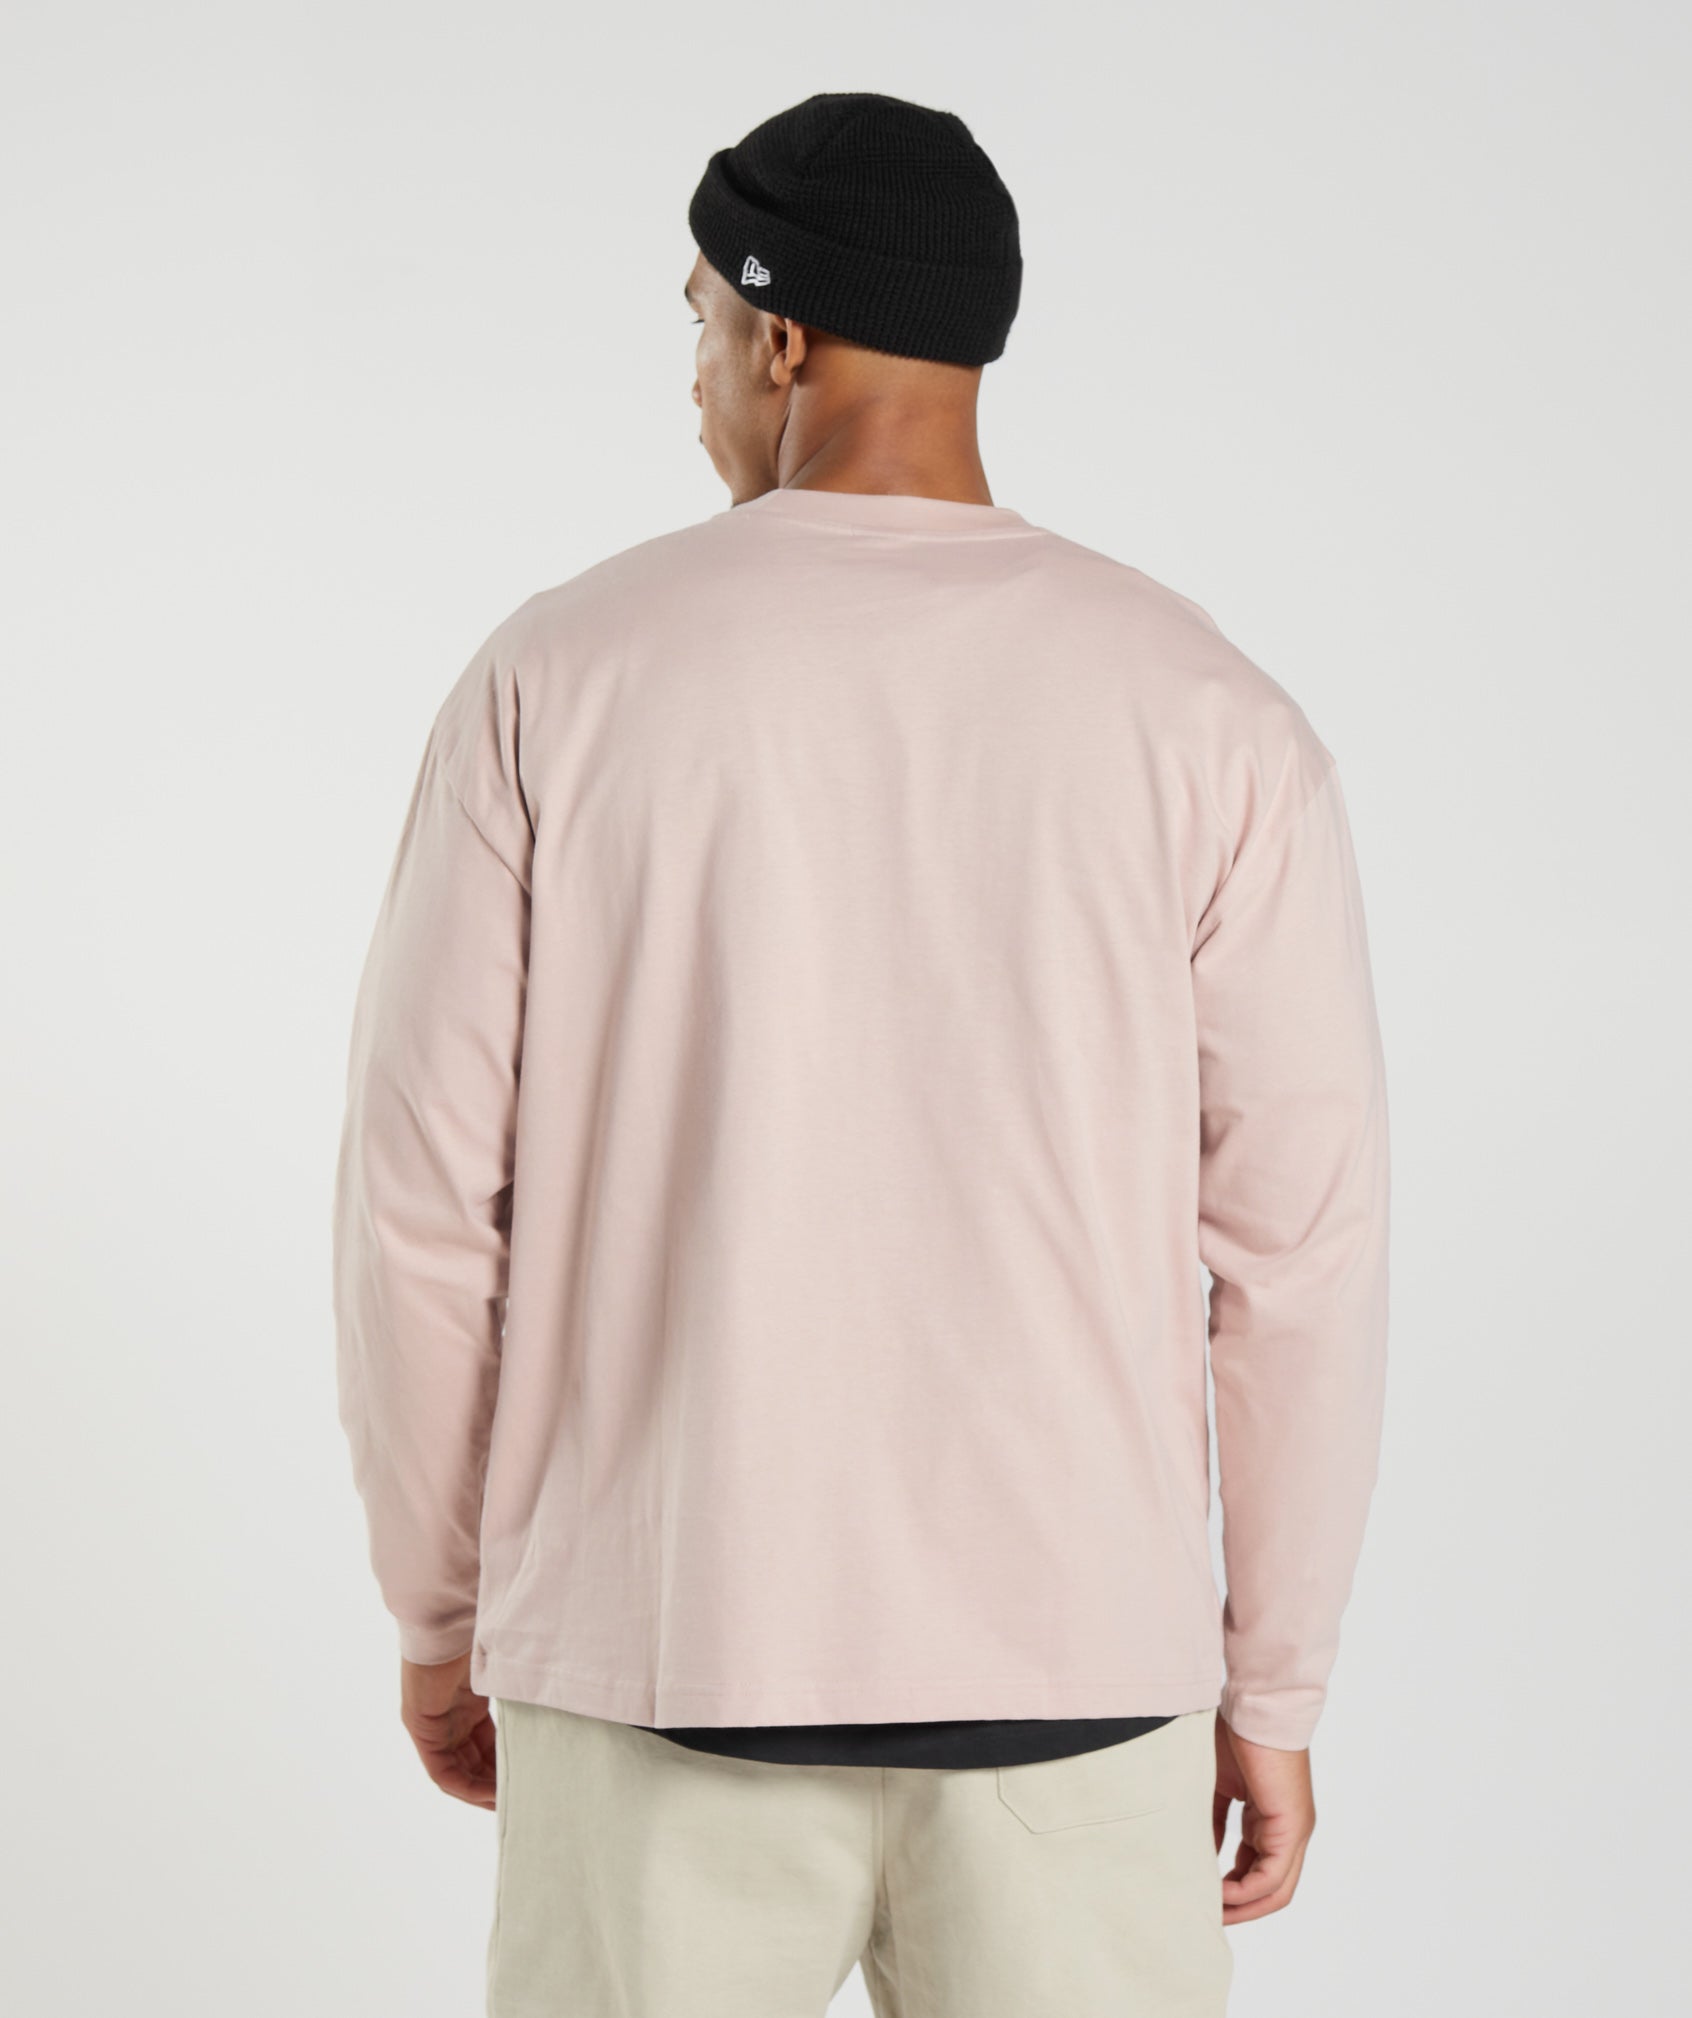 Rest Day Sweats Long Sleeve T-Shirt in Dusty Taupe - view 3